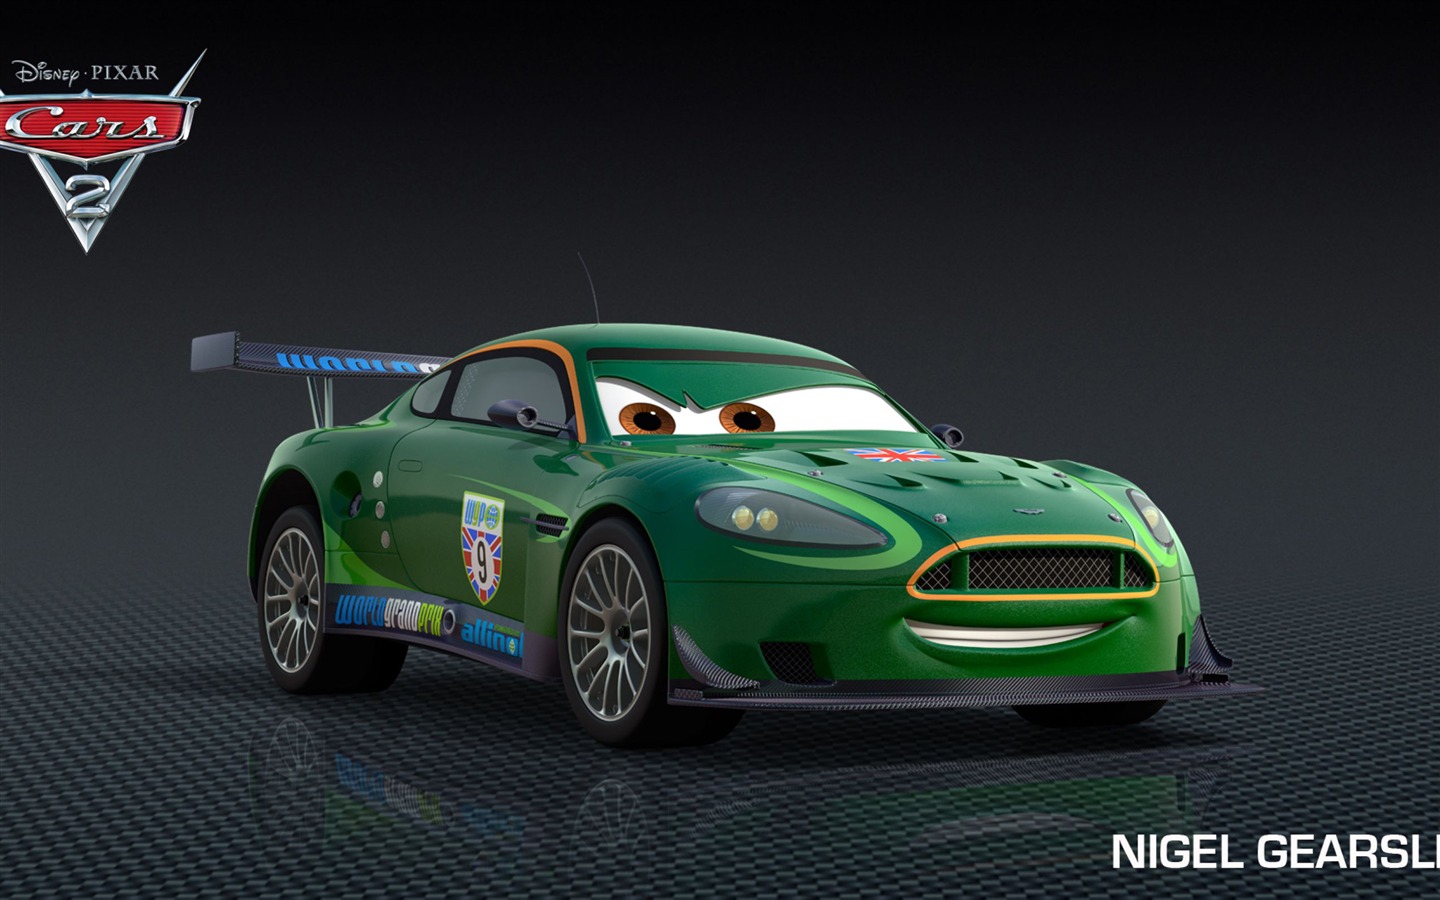 Cars 2 wallpapers #29 - 1440x900